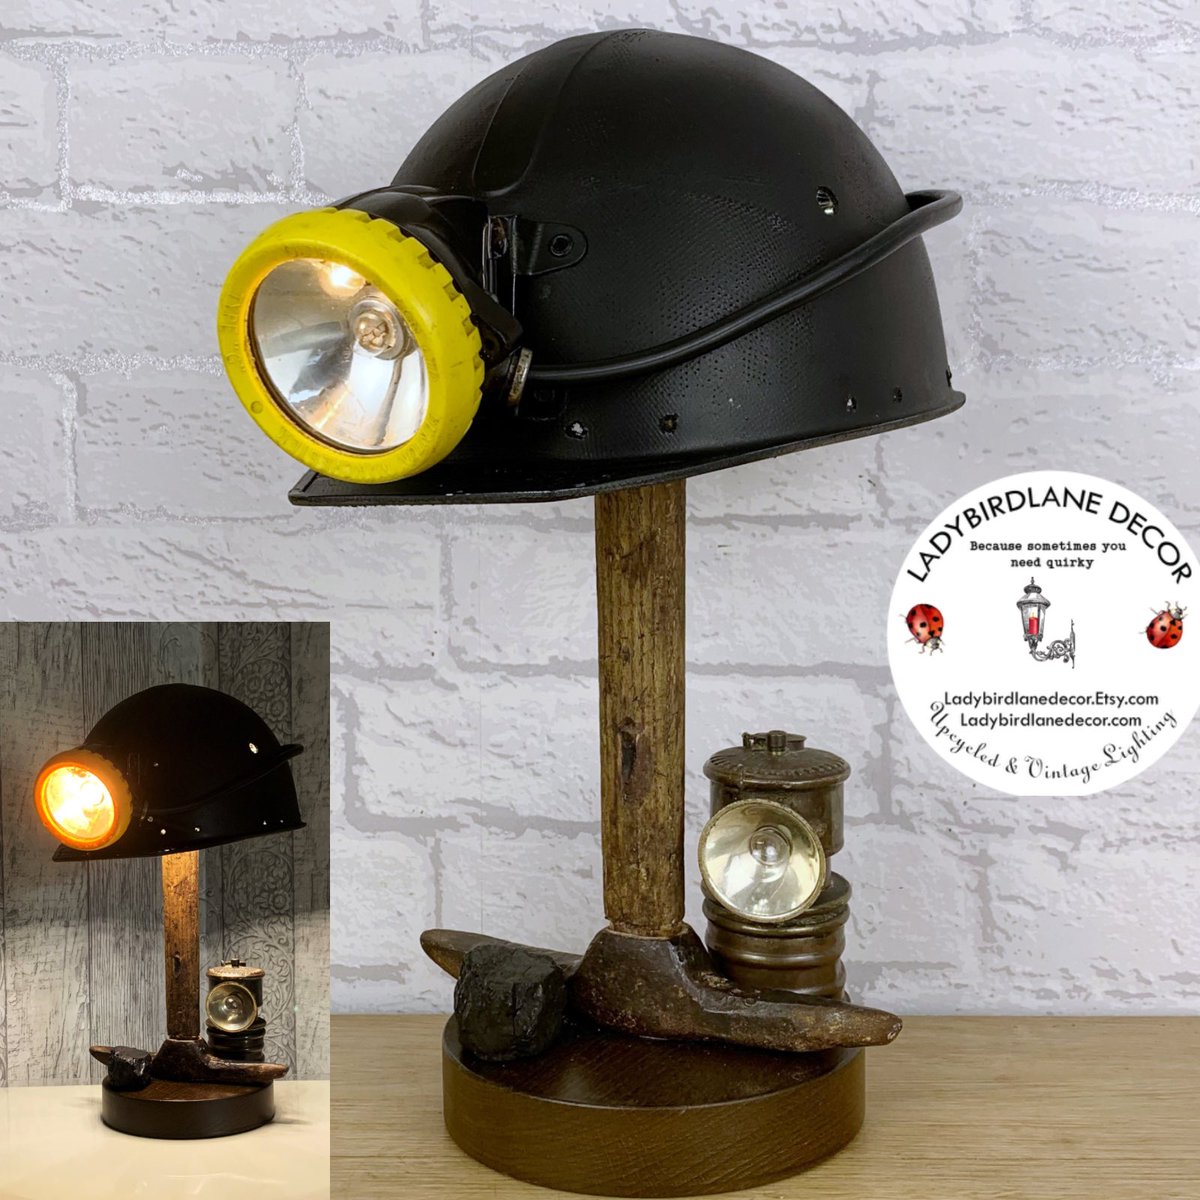 Our unique Miners Helmet Lamps are made with authentic vintage helmets, lamps and picks. Grab a bit of history while you can. A fabulous gift idea or just treat yourself. #MHHSBD #EarlyBiz